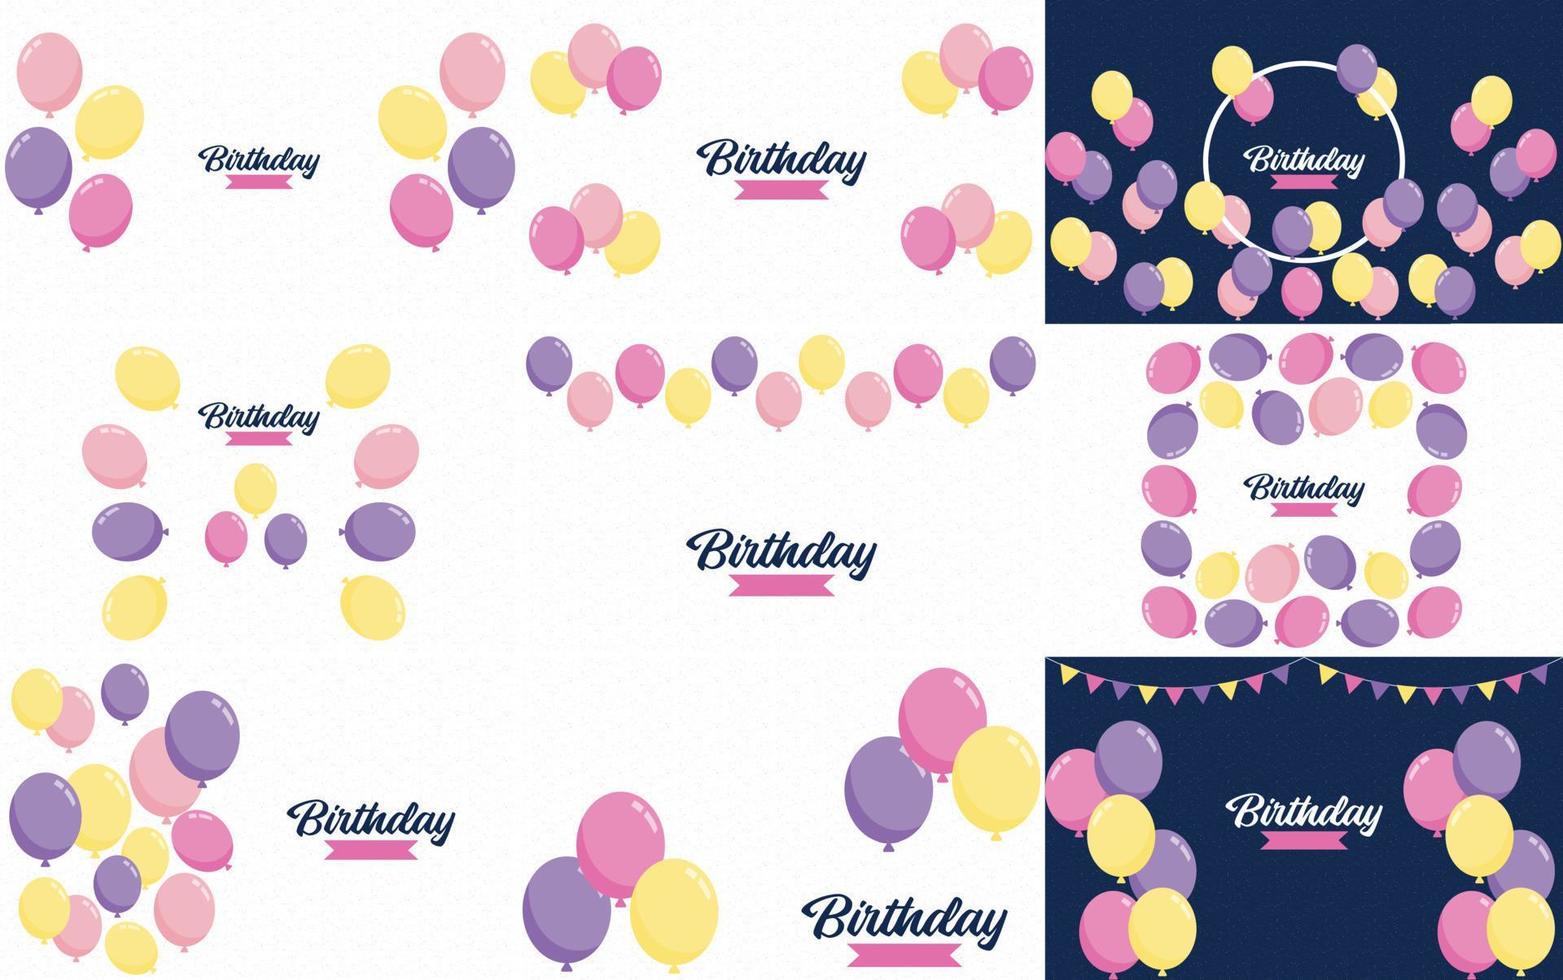 Happy Birthday text with a chalkboard-style background and hand-drawn elements such as streamers and balloons. vector